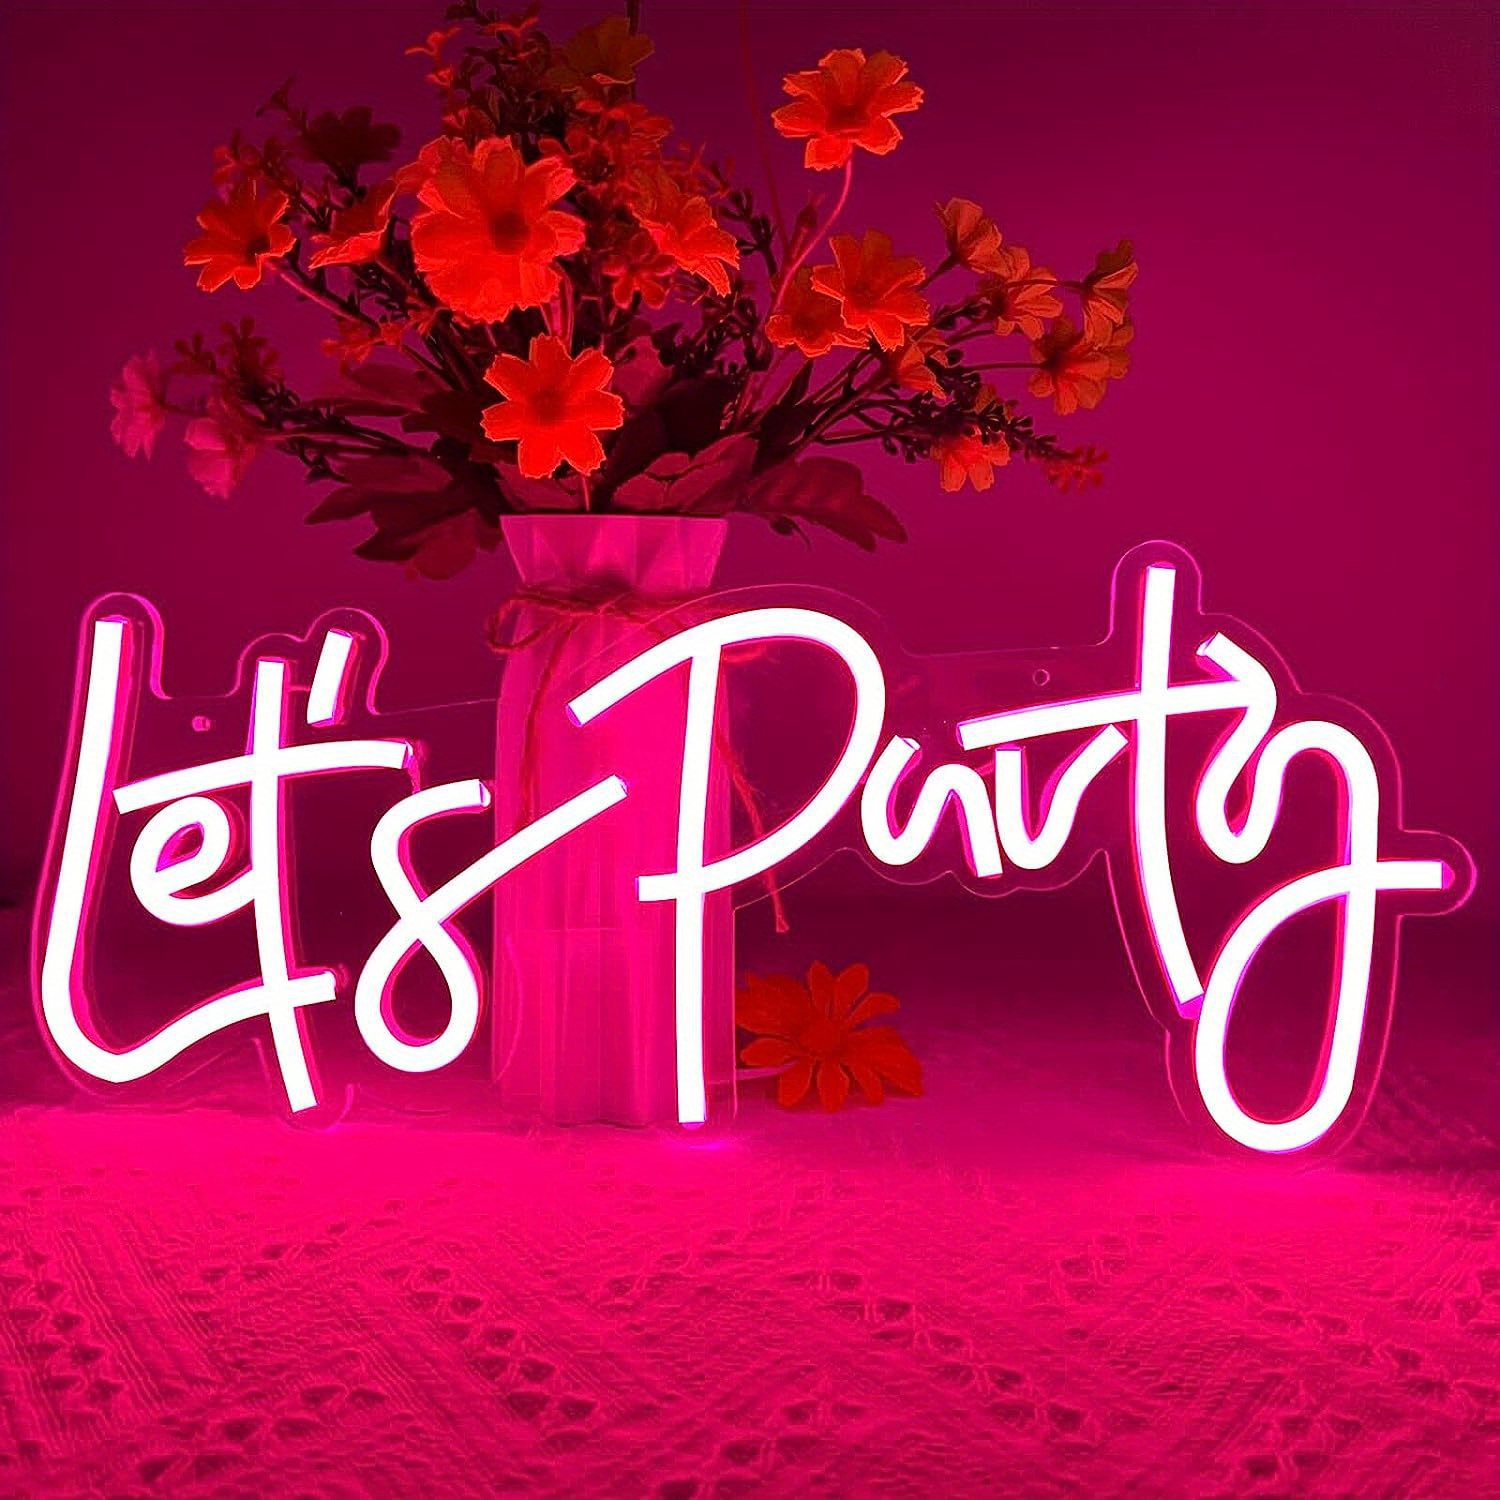 Let's Party Neon Sign  Pink Neon Light Wall Decor for Sale